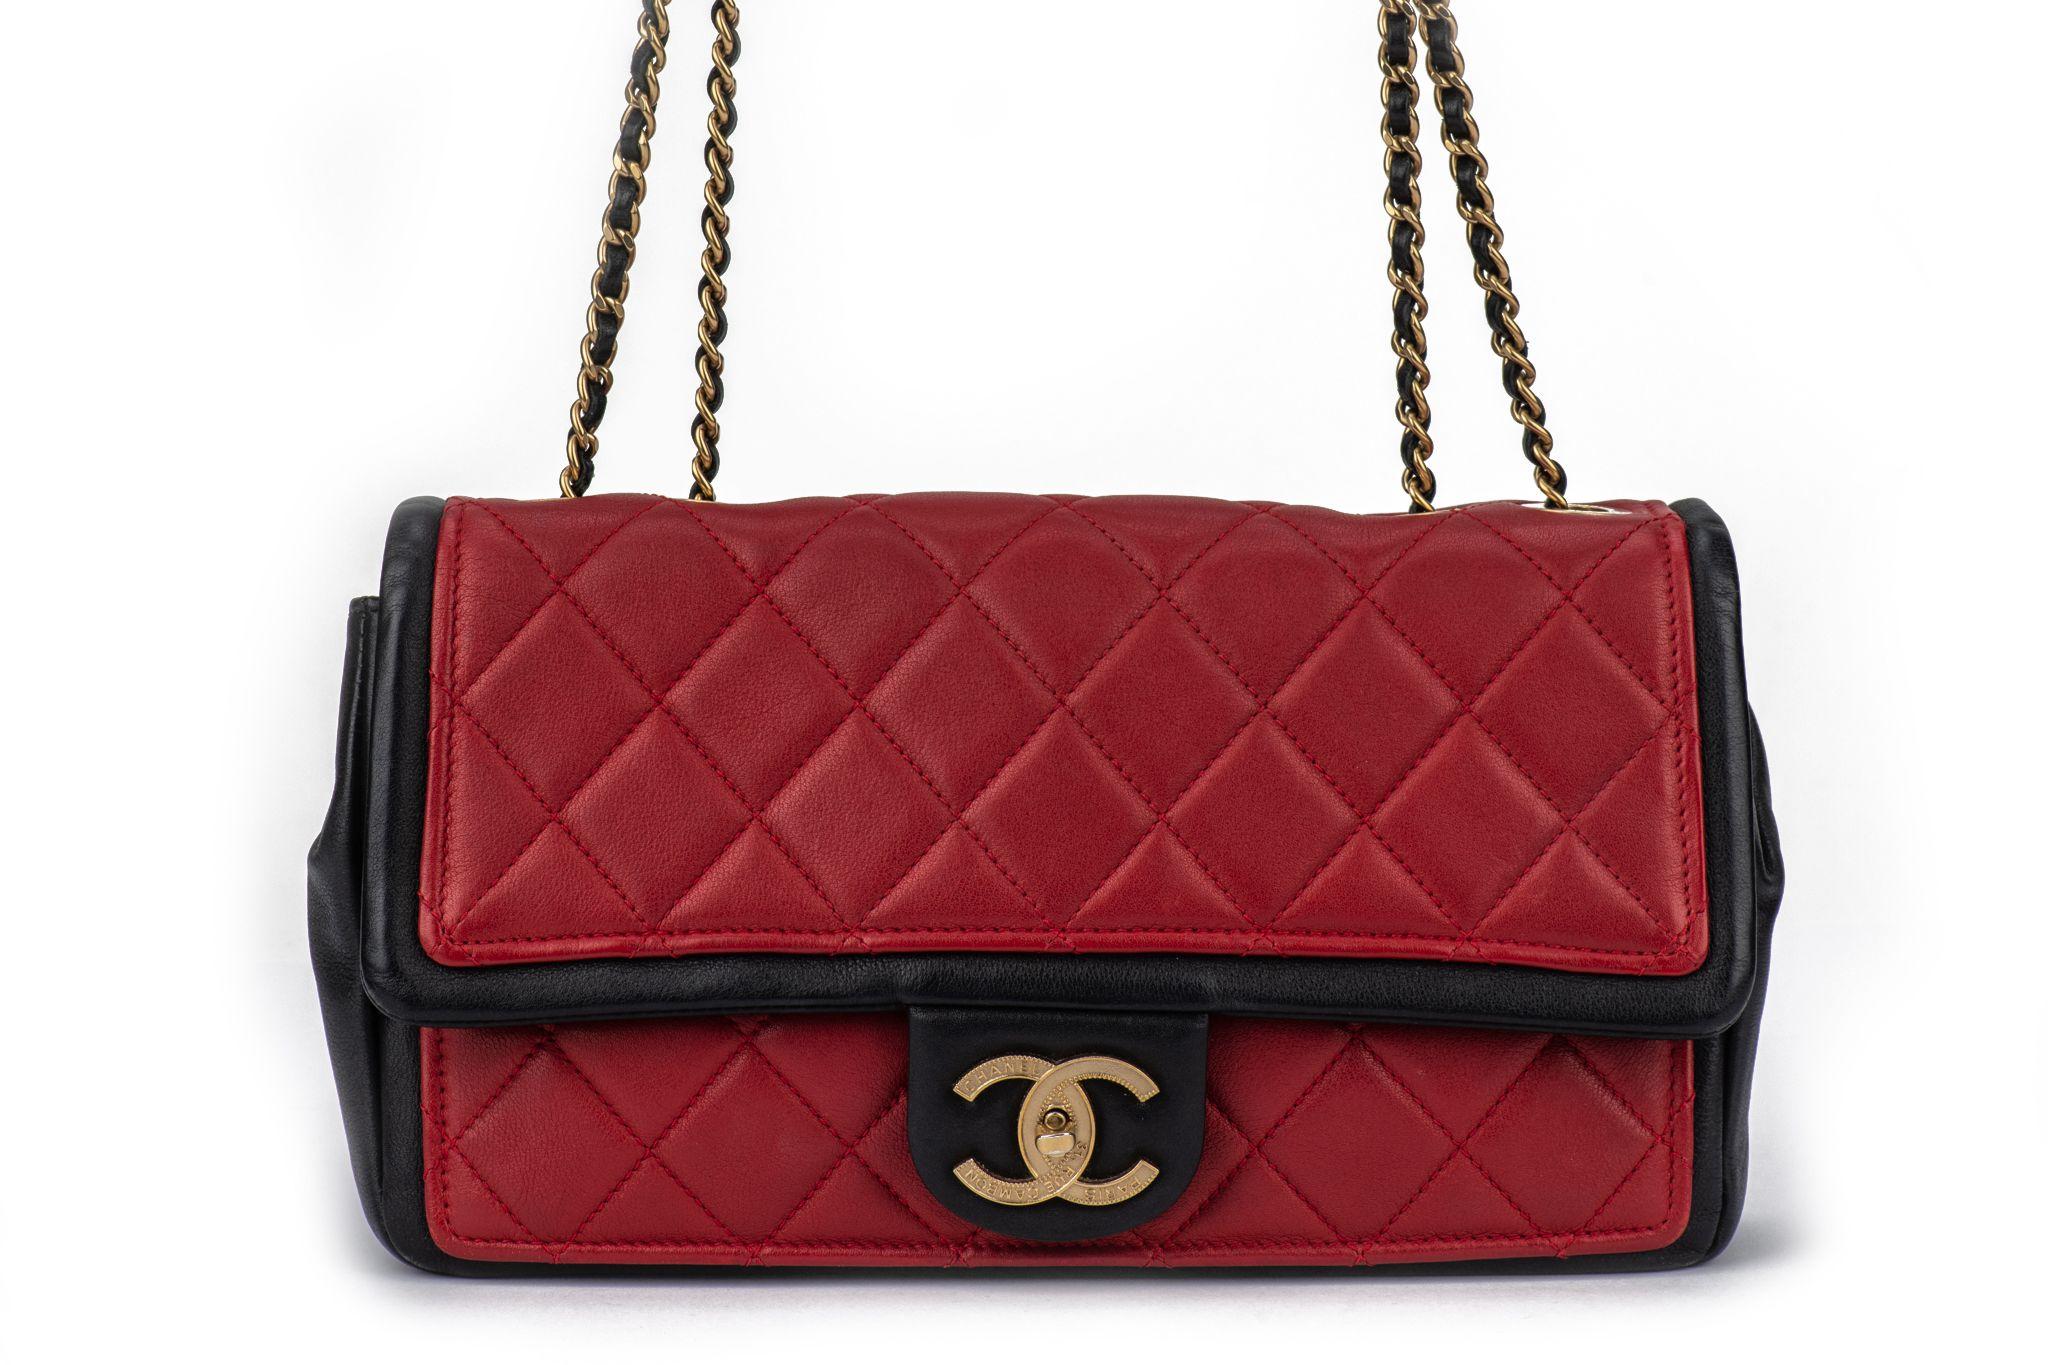 Chanel Graphic Single Flap Bag Black Red For Sale 12